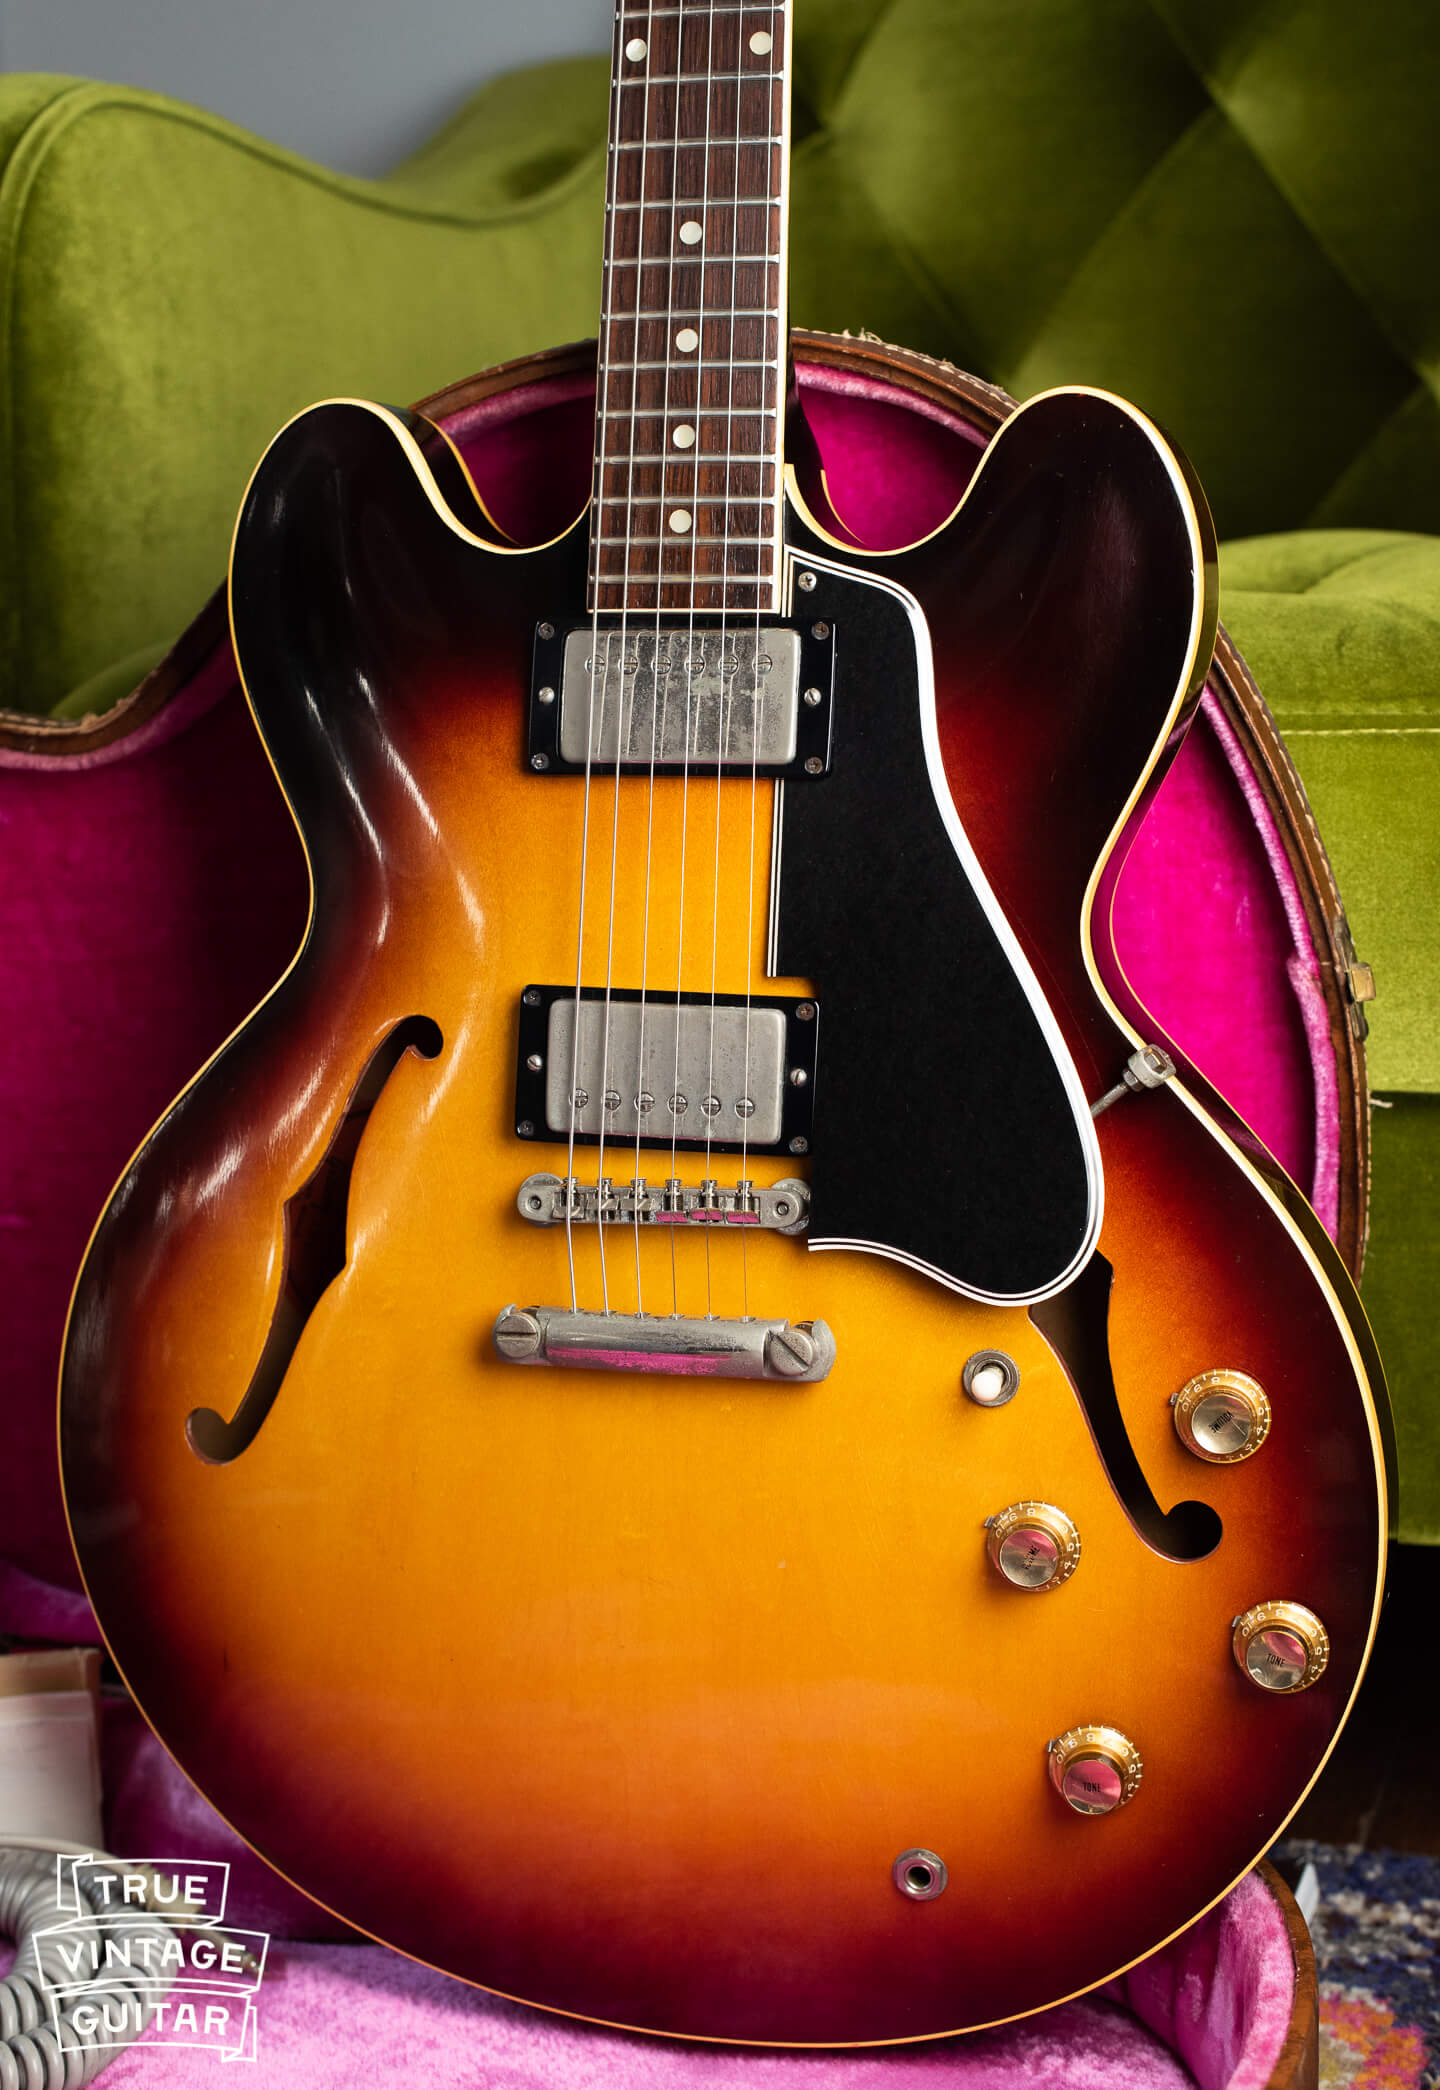 1960 Gibson ES-335 with stop bar tailpiece